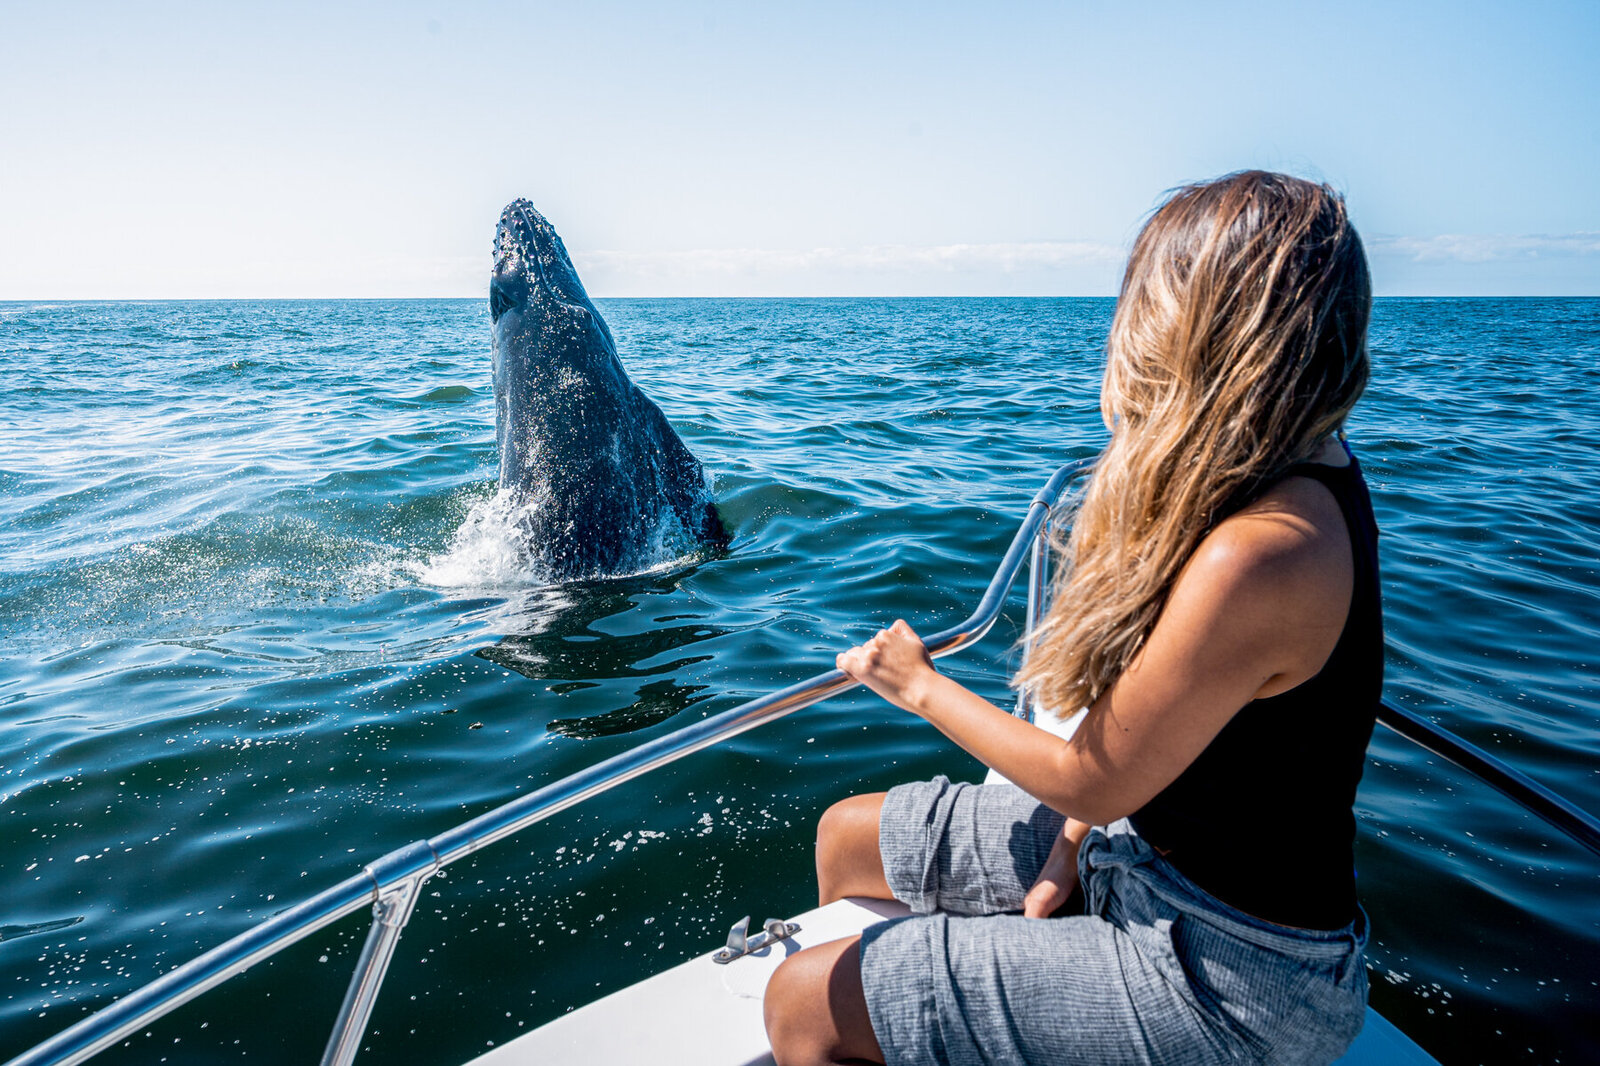 Photography-for-Adventure-Companies-Ecotourism-Careyes_N_Whales_-Brands-that-Impact-_Feb2021-